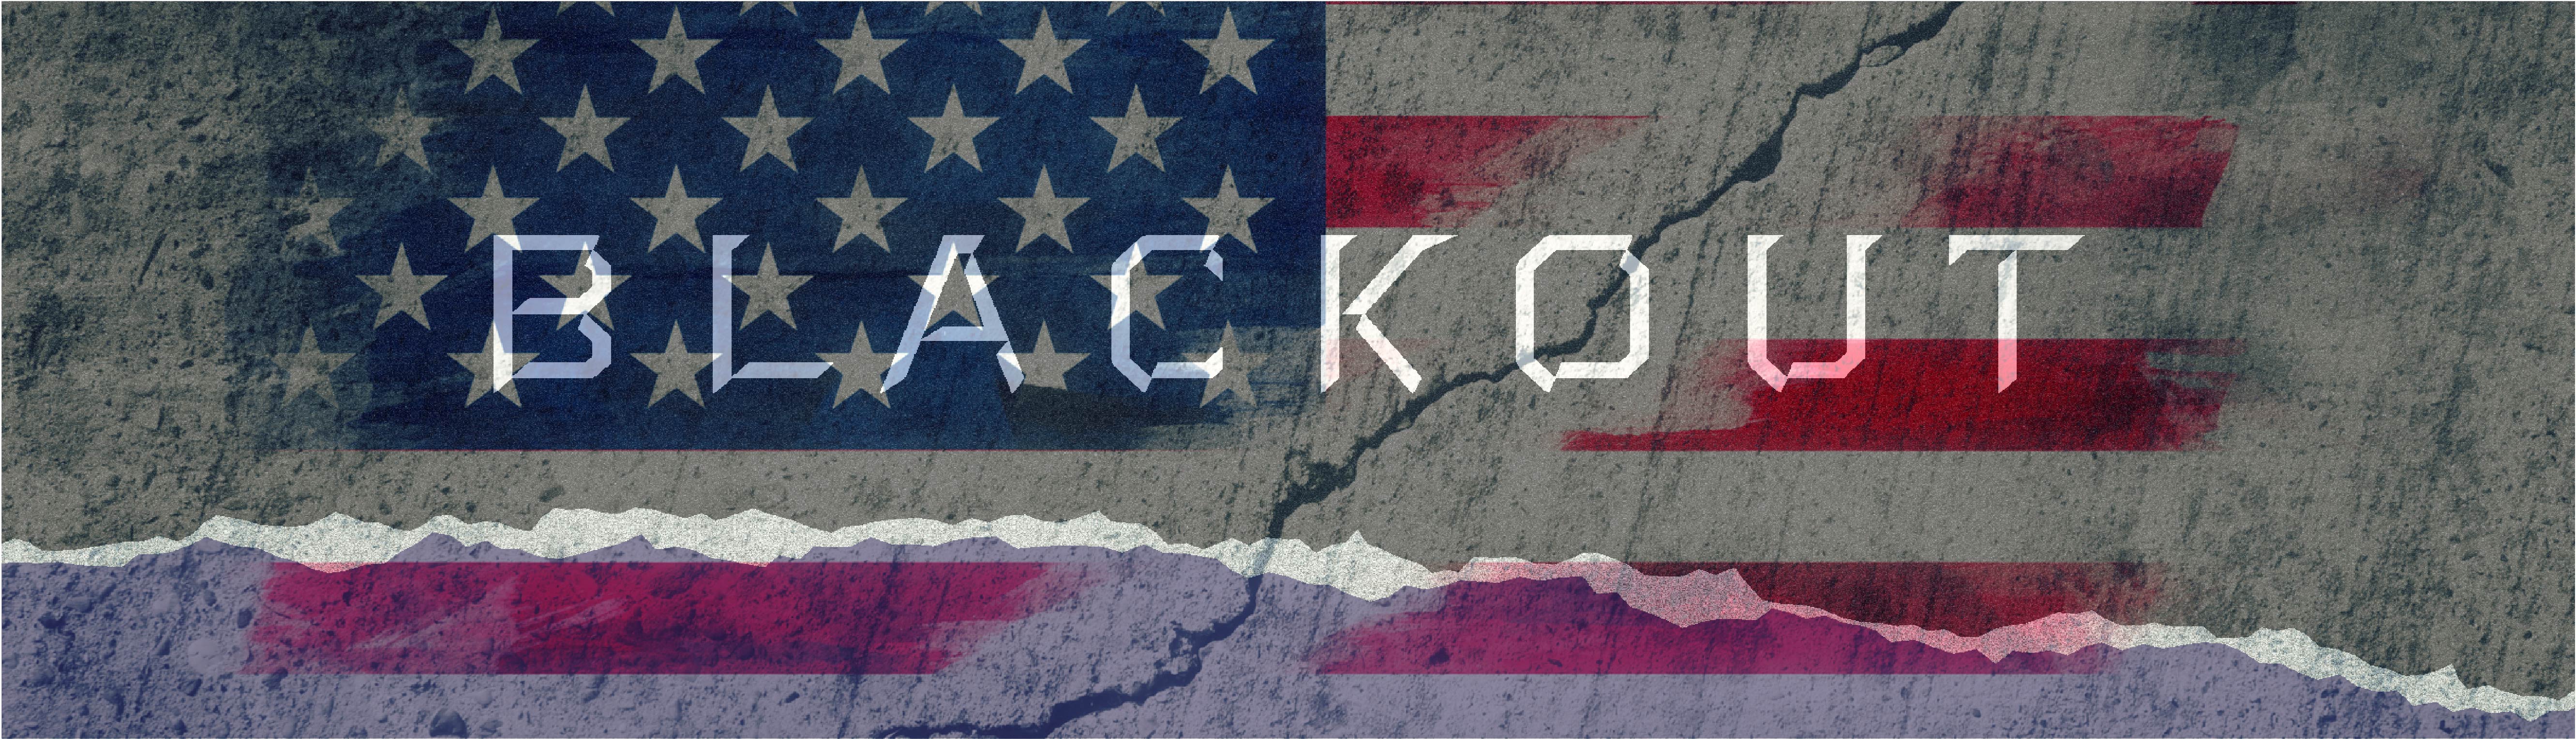 Operation Blackout Virtual Edition: Election Security Tabletops